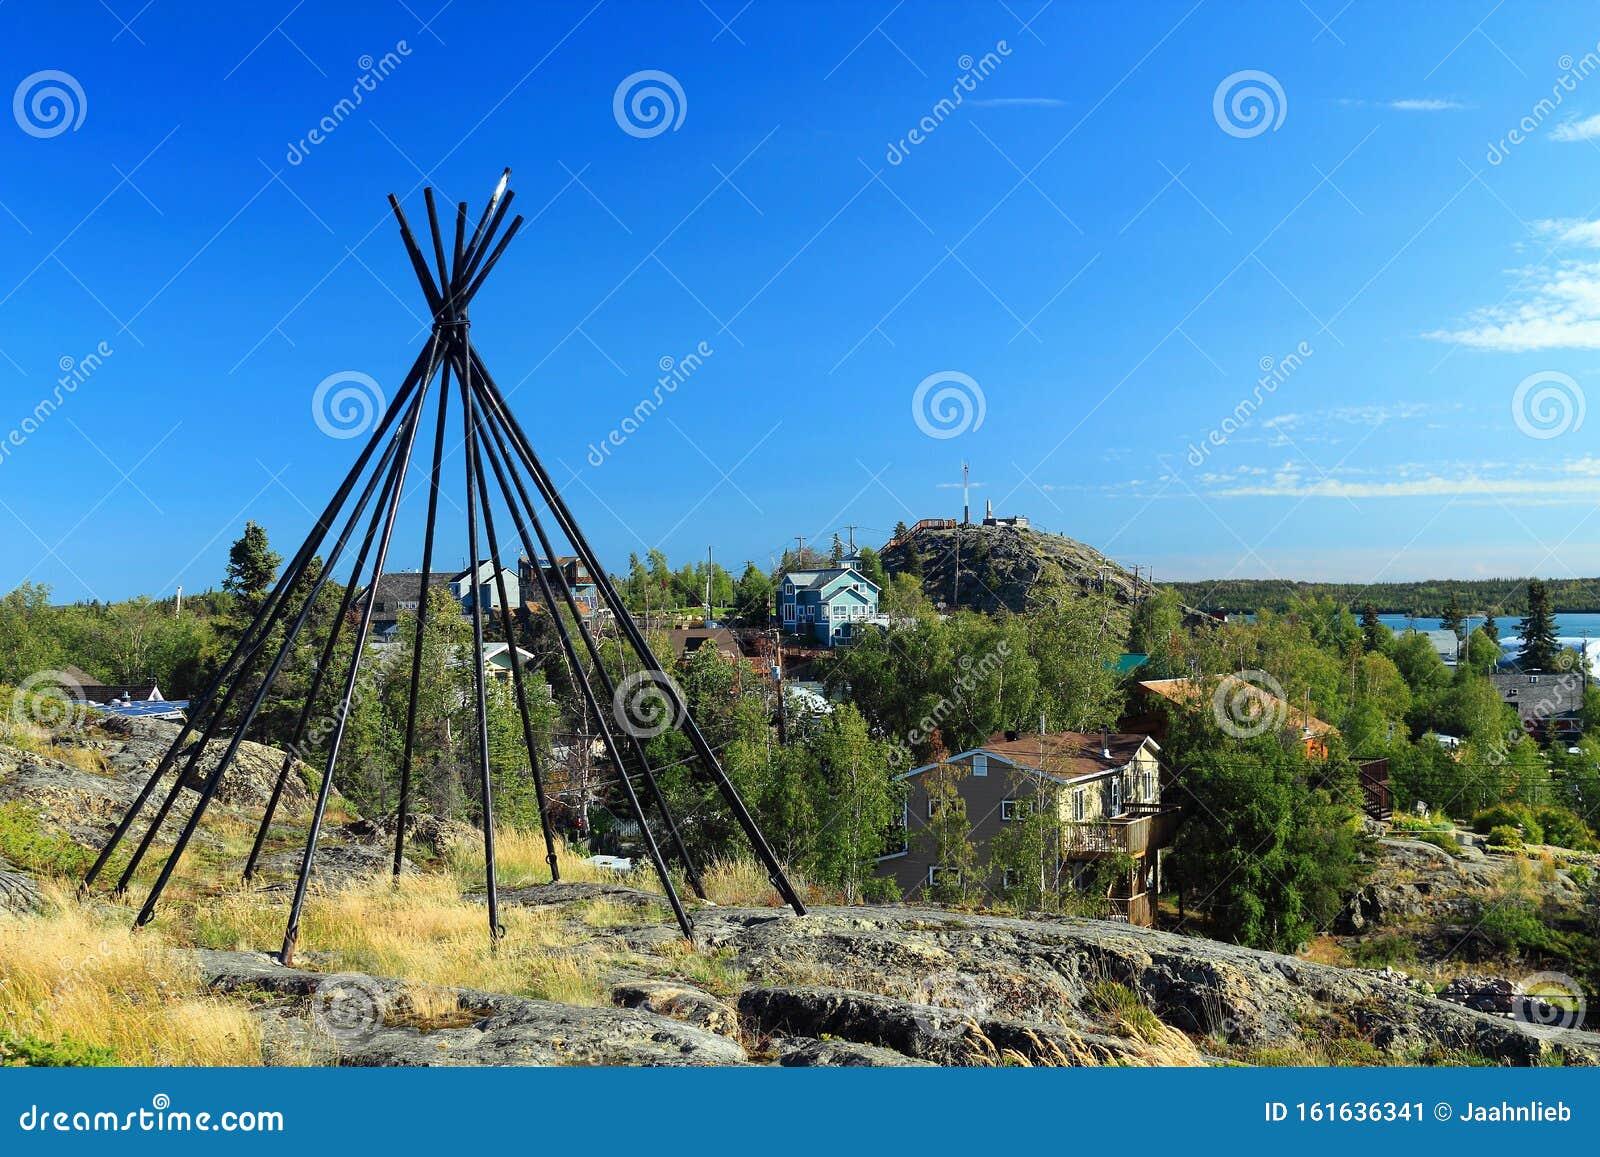 yellowknife, tipi at cultural crossroads monument and old town, northwest territories, canada